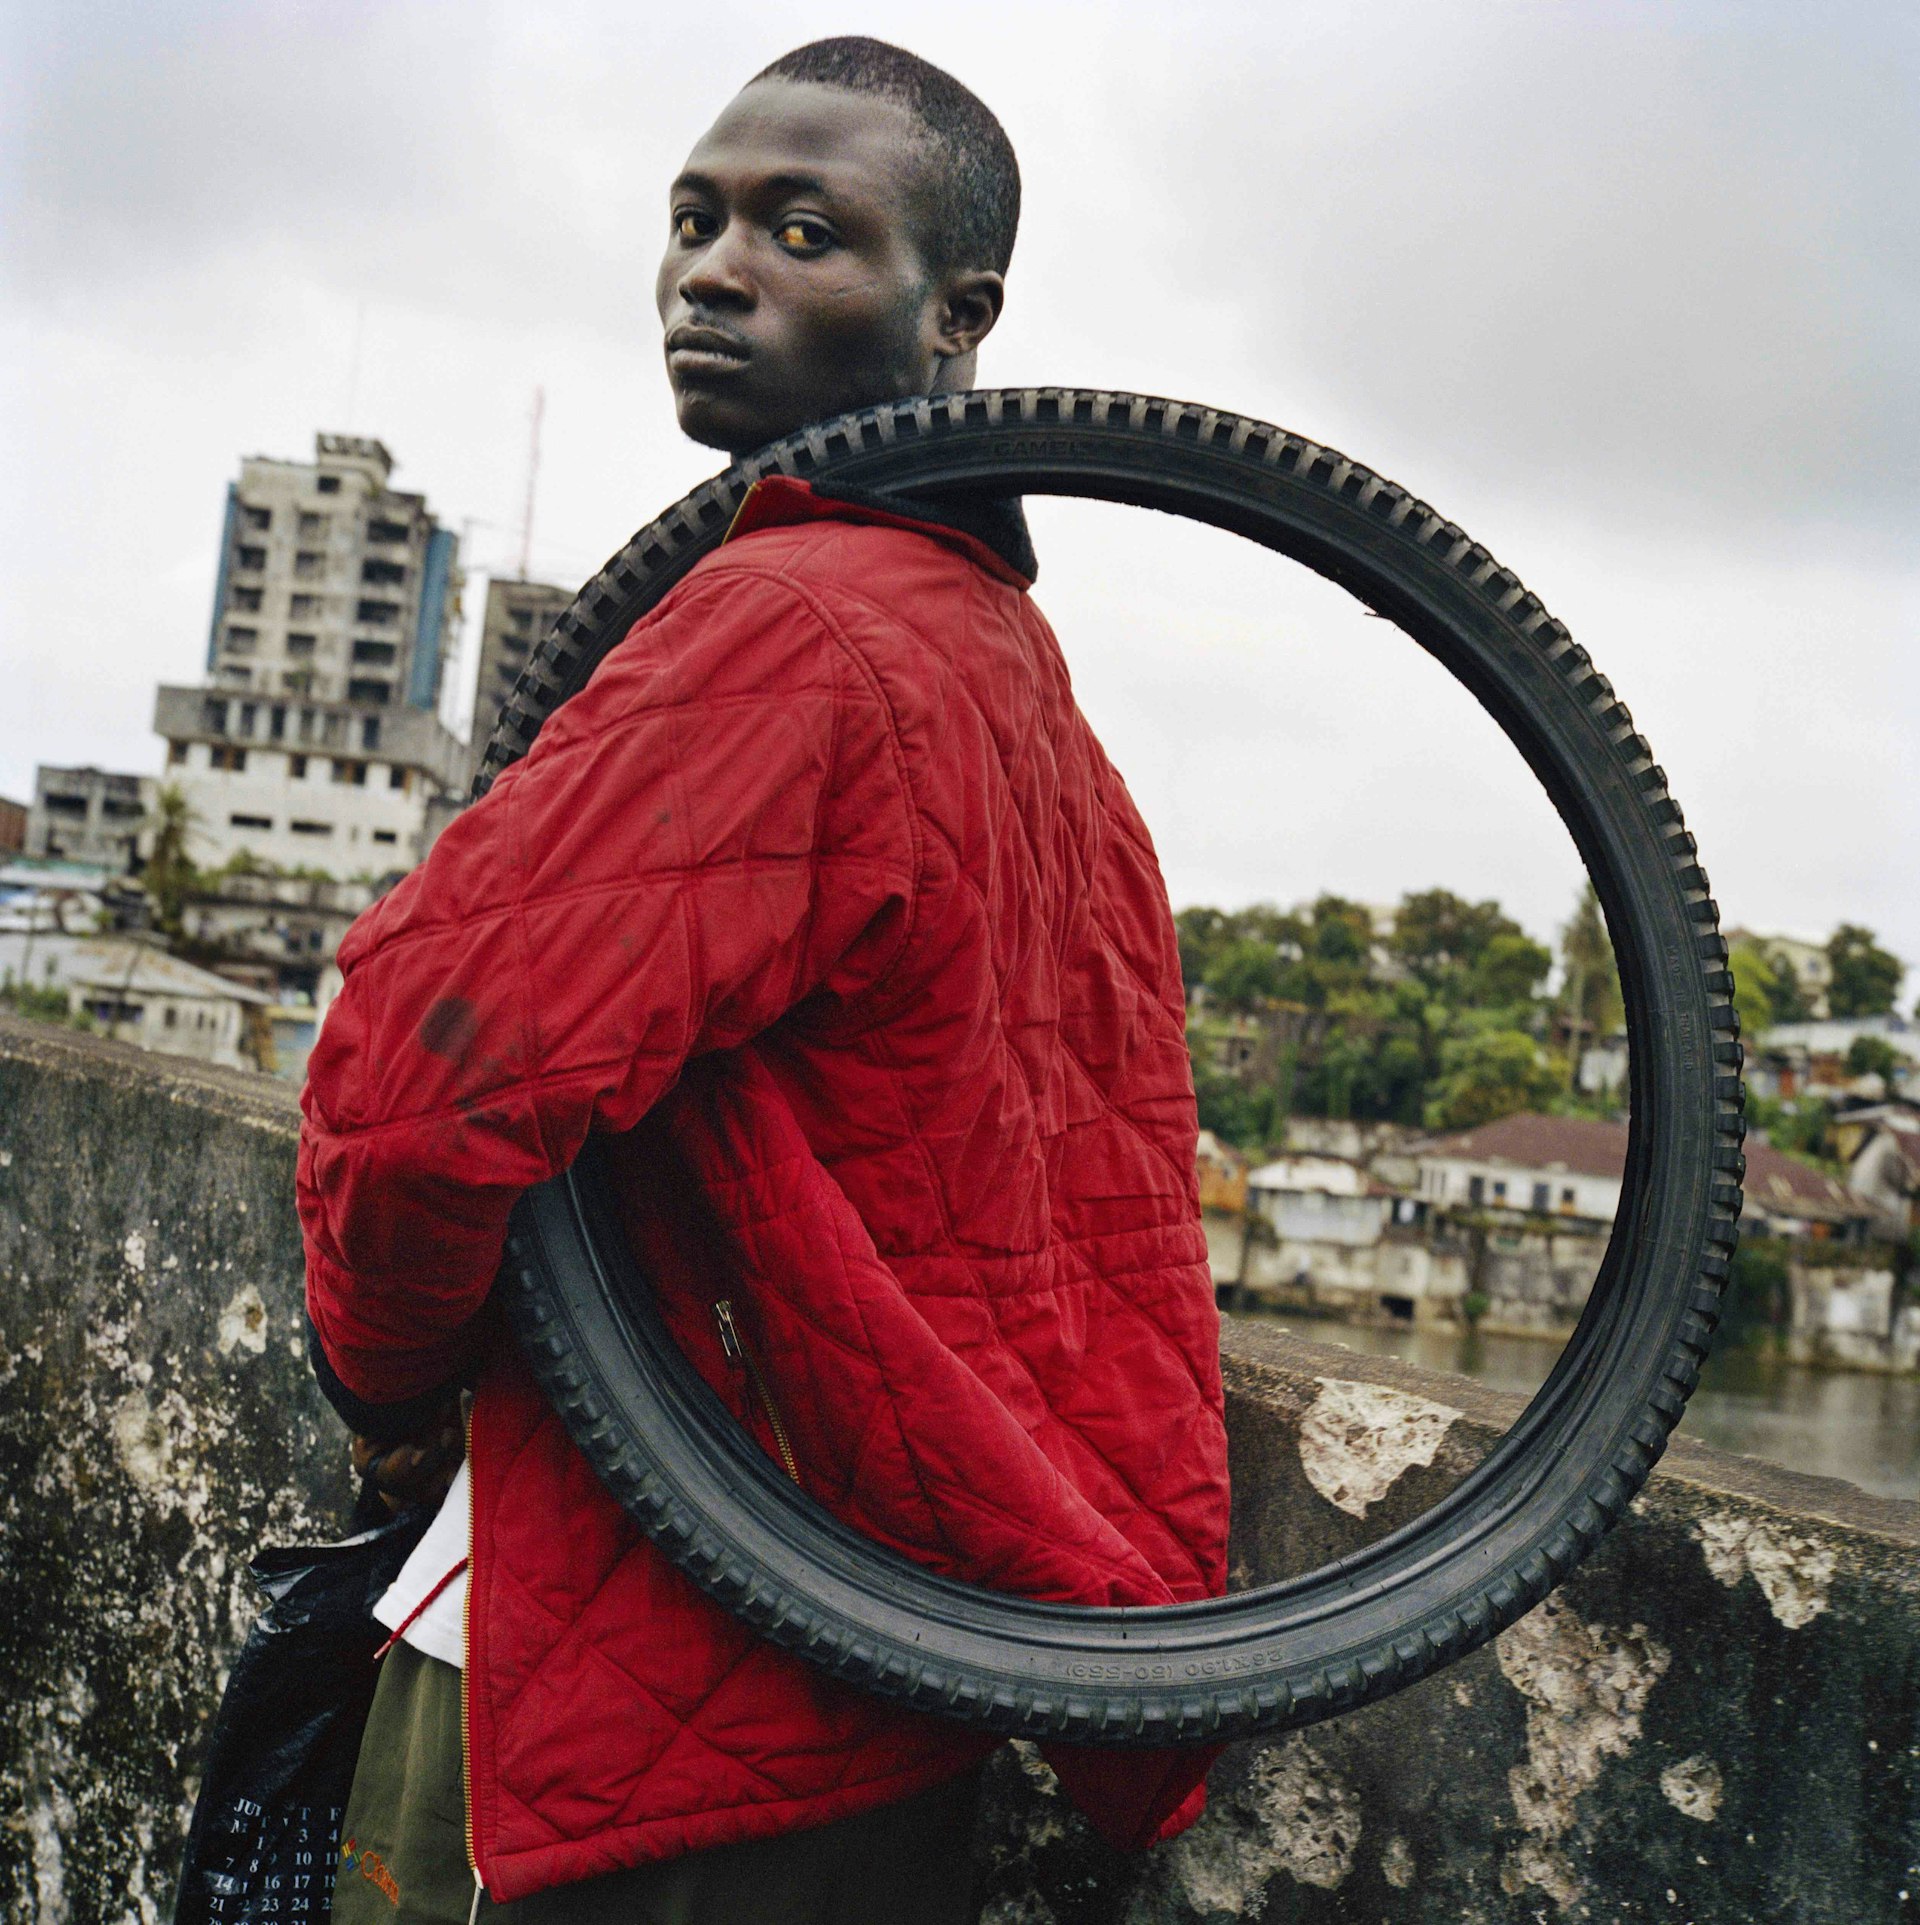 LIBERIA. 2003. Young man on the Gabriel Tucker bridge in central Monrovia carries a tyre which he is trying to sell. Liberia is one of the world's largest rubber producers and home to the Firestone Rubber Plantation. © Tim Hetherington / Magnum Photos